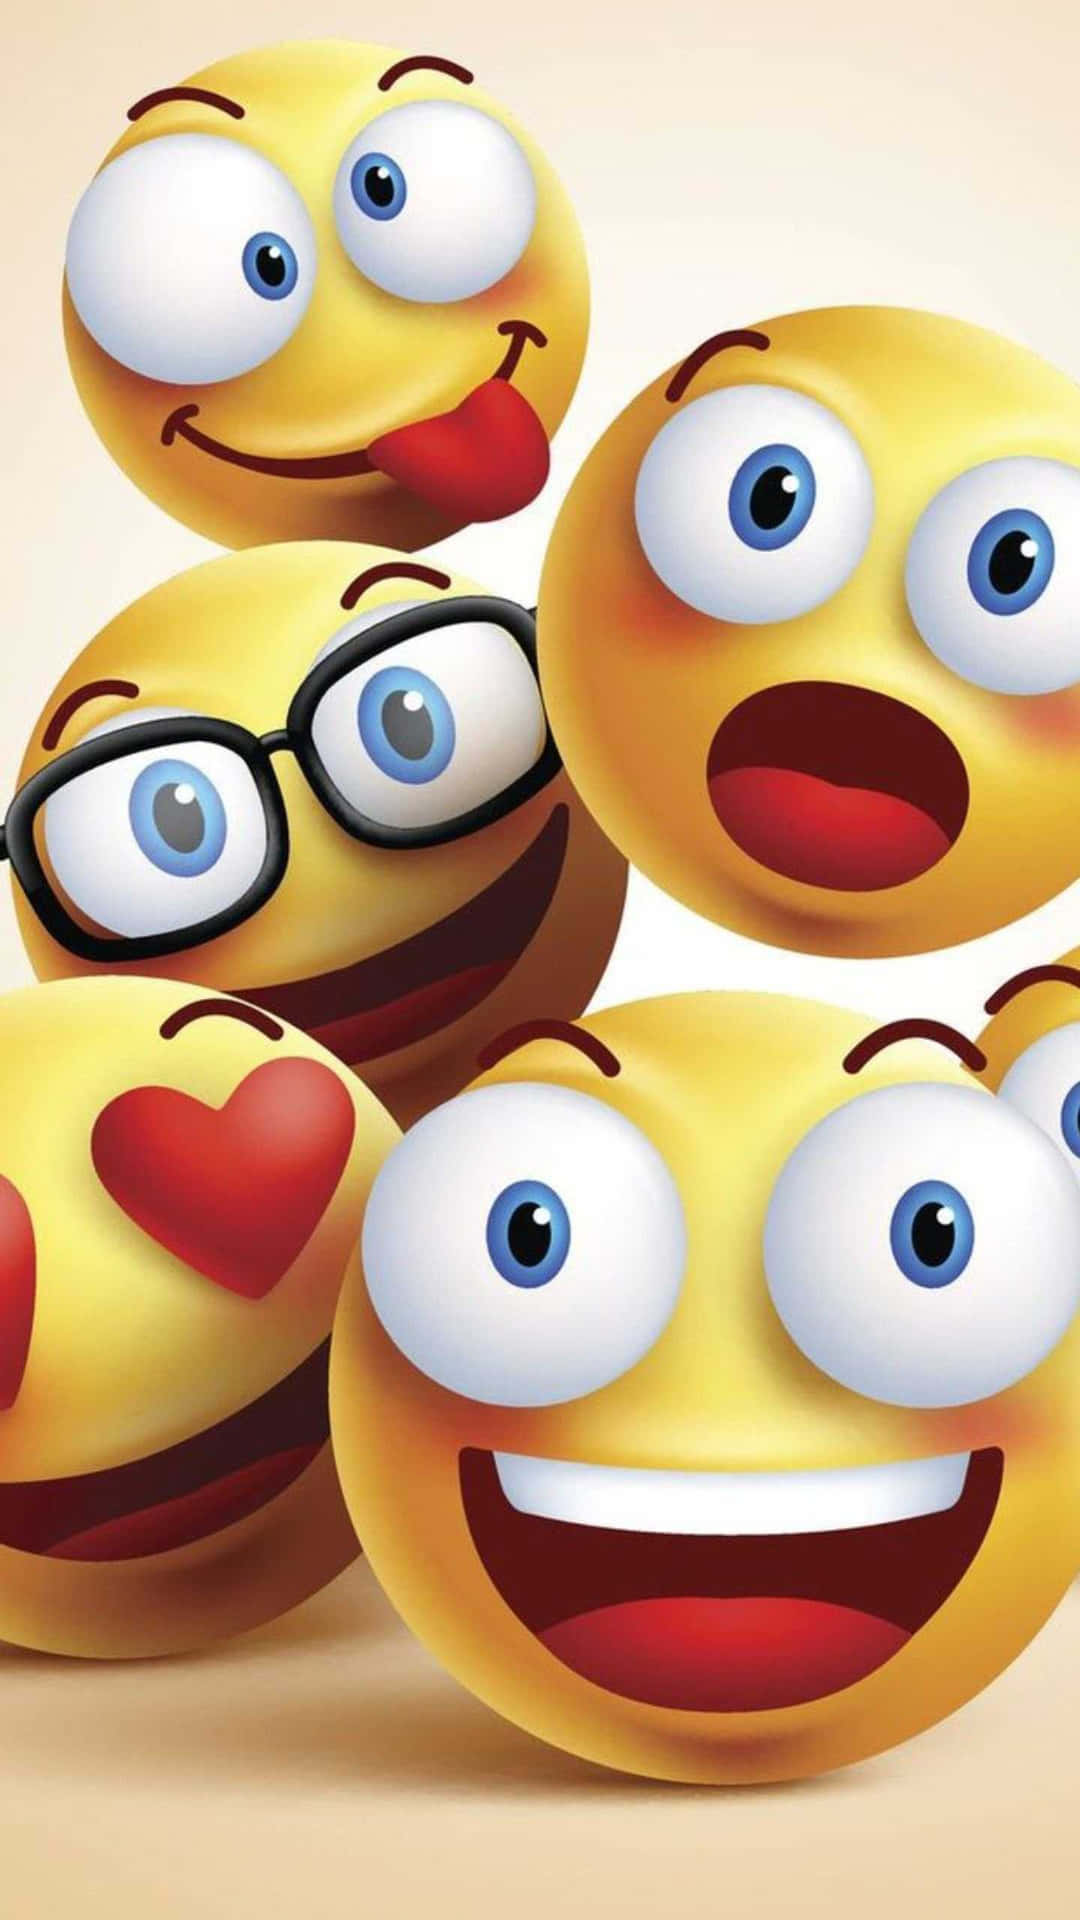 Awww! Express Your Love With This Cute Emoji Wallpaper